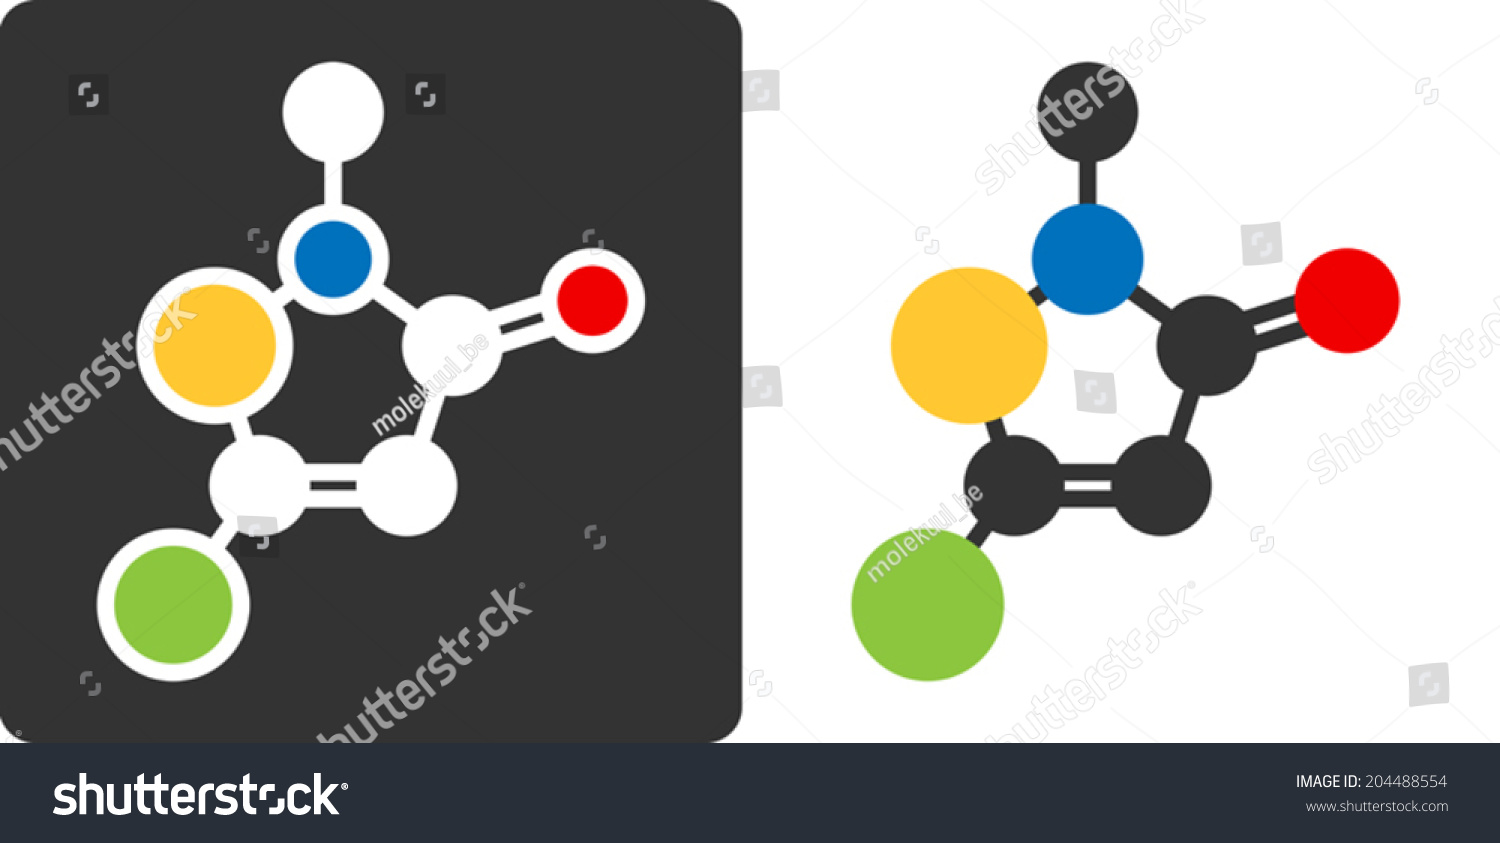 SVG of Methylchloroisothiazolinone preservative molecule, flat icon style. Atoms shown as color-coded circles (oxygen - red, carbon - white/grey, sulfur - yellow, nitrogen - blue, chlorine - green, etc) svg